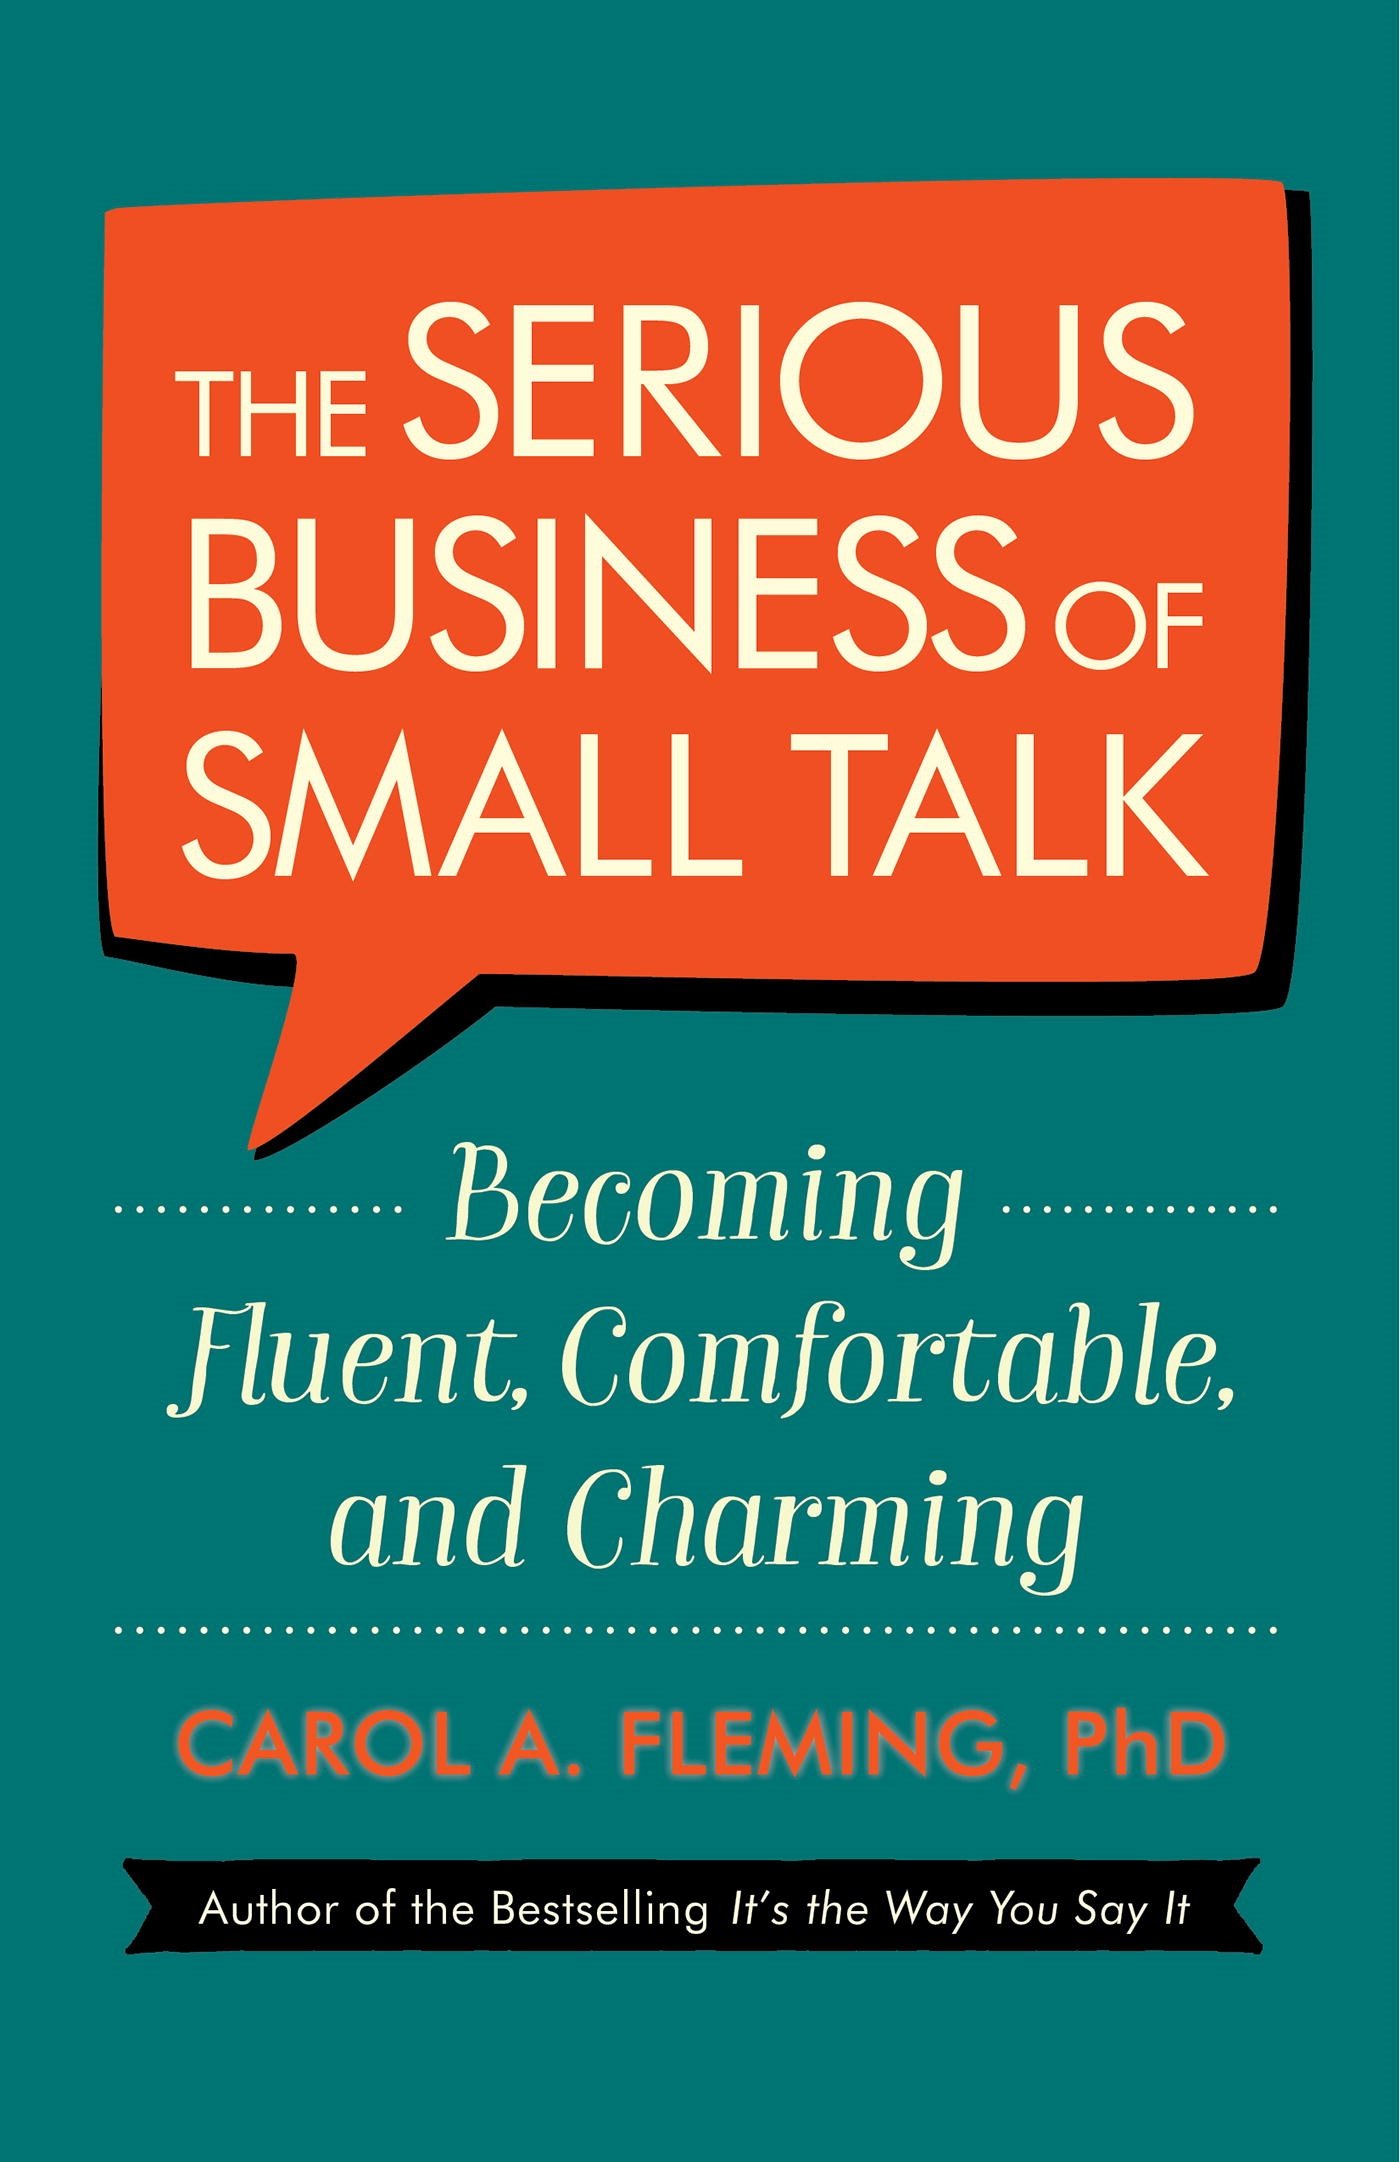 The Serious Business of Small Talk - Becoming Fluent, Comfortable, and Charming | Carol A. Fleming